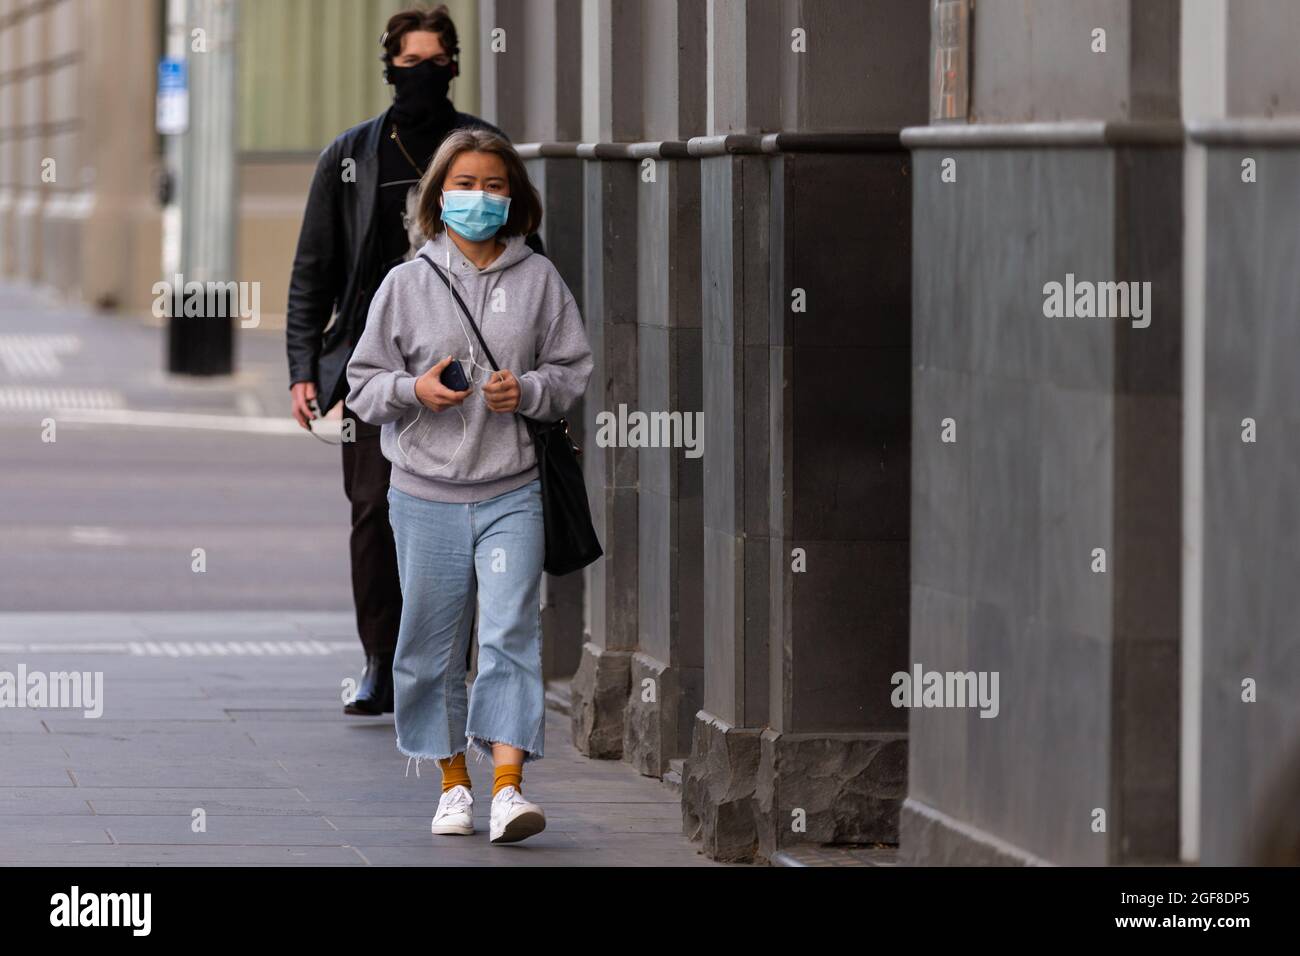 Melbourne, Australia, 15 July, 2020. Locals are seen wearing facemasks in the CBD during COVID 19 on 15 July, 2020 in Melbourne, Australia. A further 238 COVID-19 cases have been discovered overnight, bringing Victoria’s active cases to over 2000, speculation is rising that almost all of Victoria’s current cases stem from the Andrews Government botched hotel quarantine scheme as well as the Black Lives Matter protest.  Premier Daniel Andrews warns that Victoria may go to Stage 4 lockdown if these high numbers continue. Credit: Dave Hewison/Speed Media/Alamy Live News Stock Photo